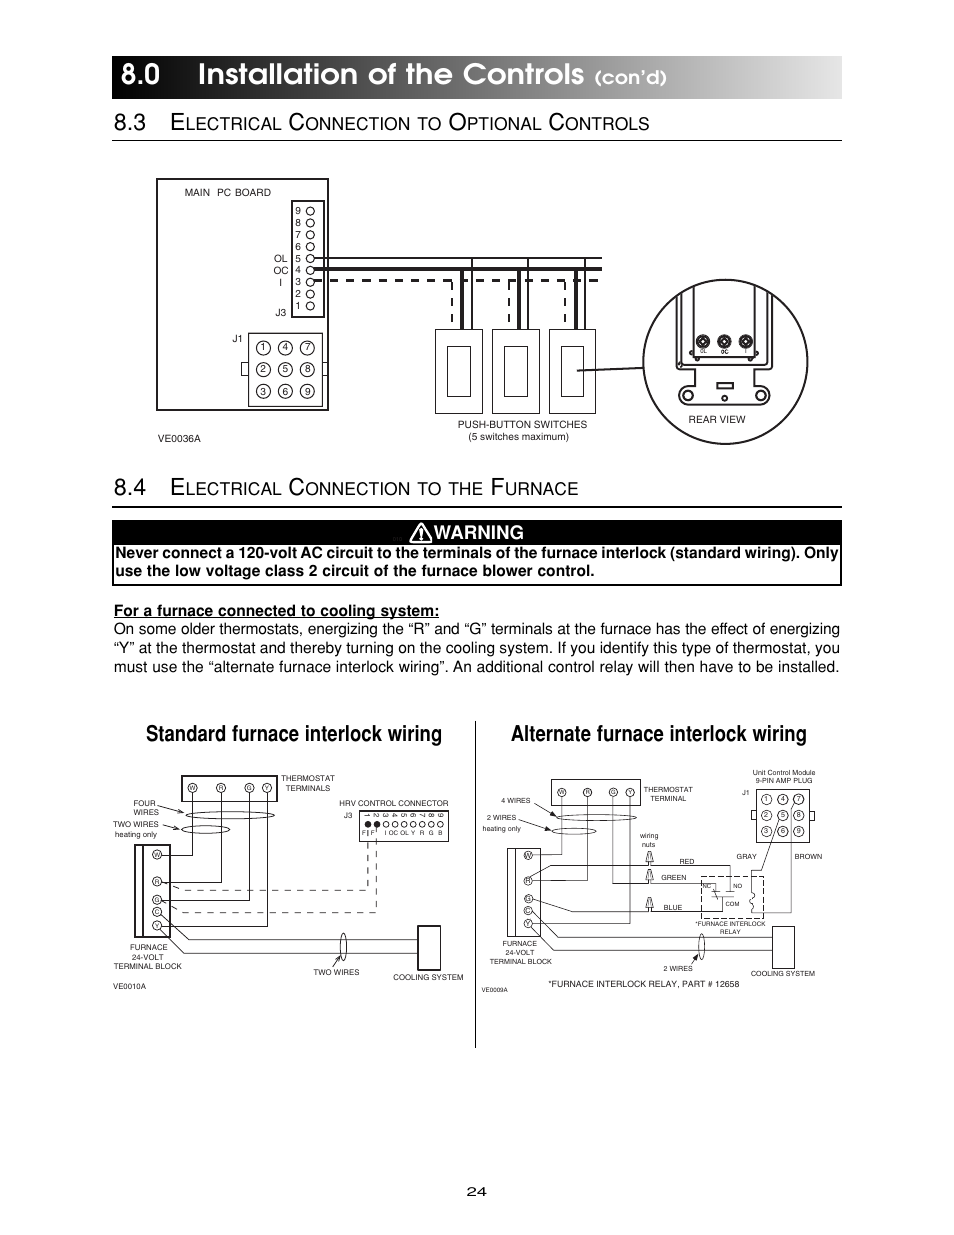 0 installation of the controls, Standard furnace interlock wiring, Alternate furnace interlock wiring | Con’d), Warning, Lectrical, Onnection to, Ptional, Ontrols, Onnection to the | Maytag Ventilation Systems HRV-210 User Manual | Page 24 / 32